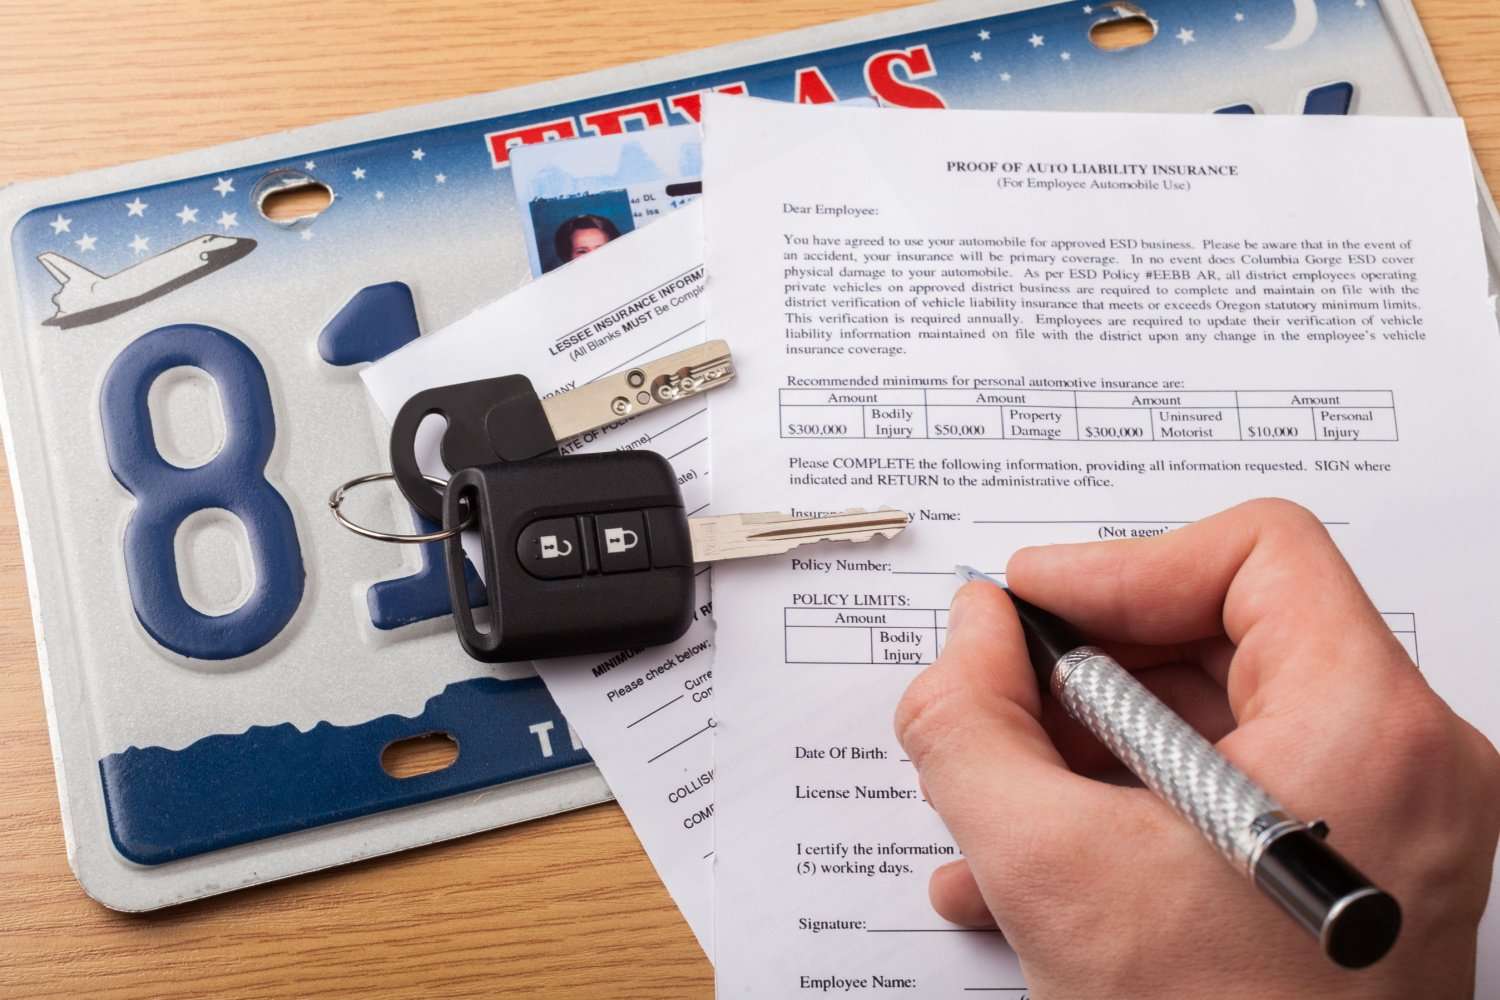 Can I register a car without a license in New Jersey?